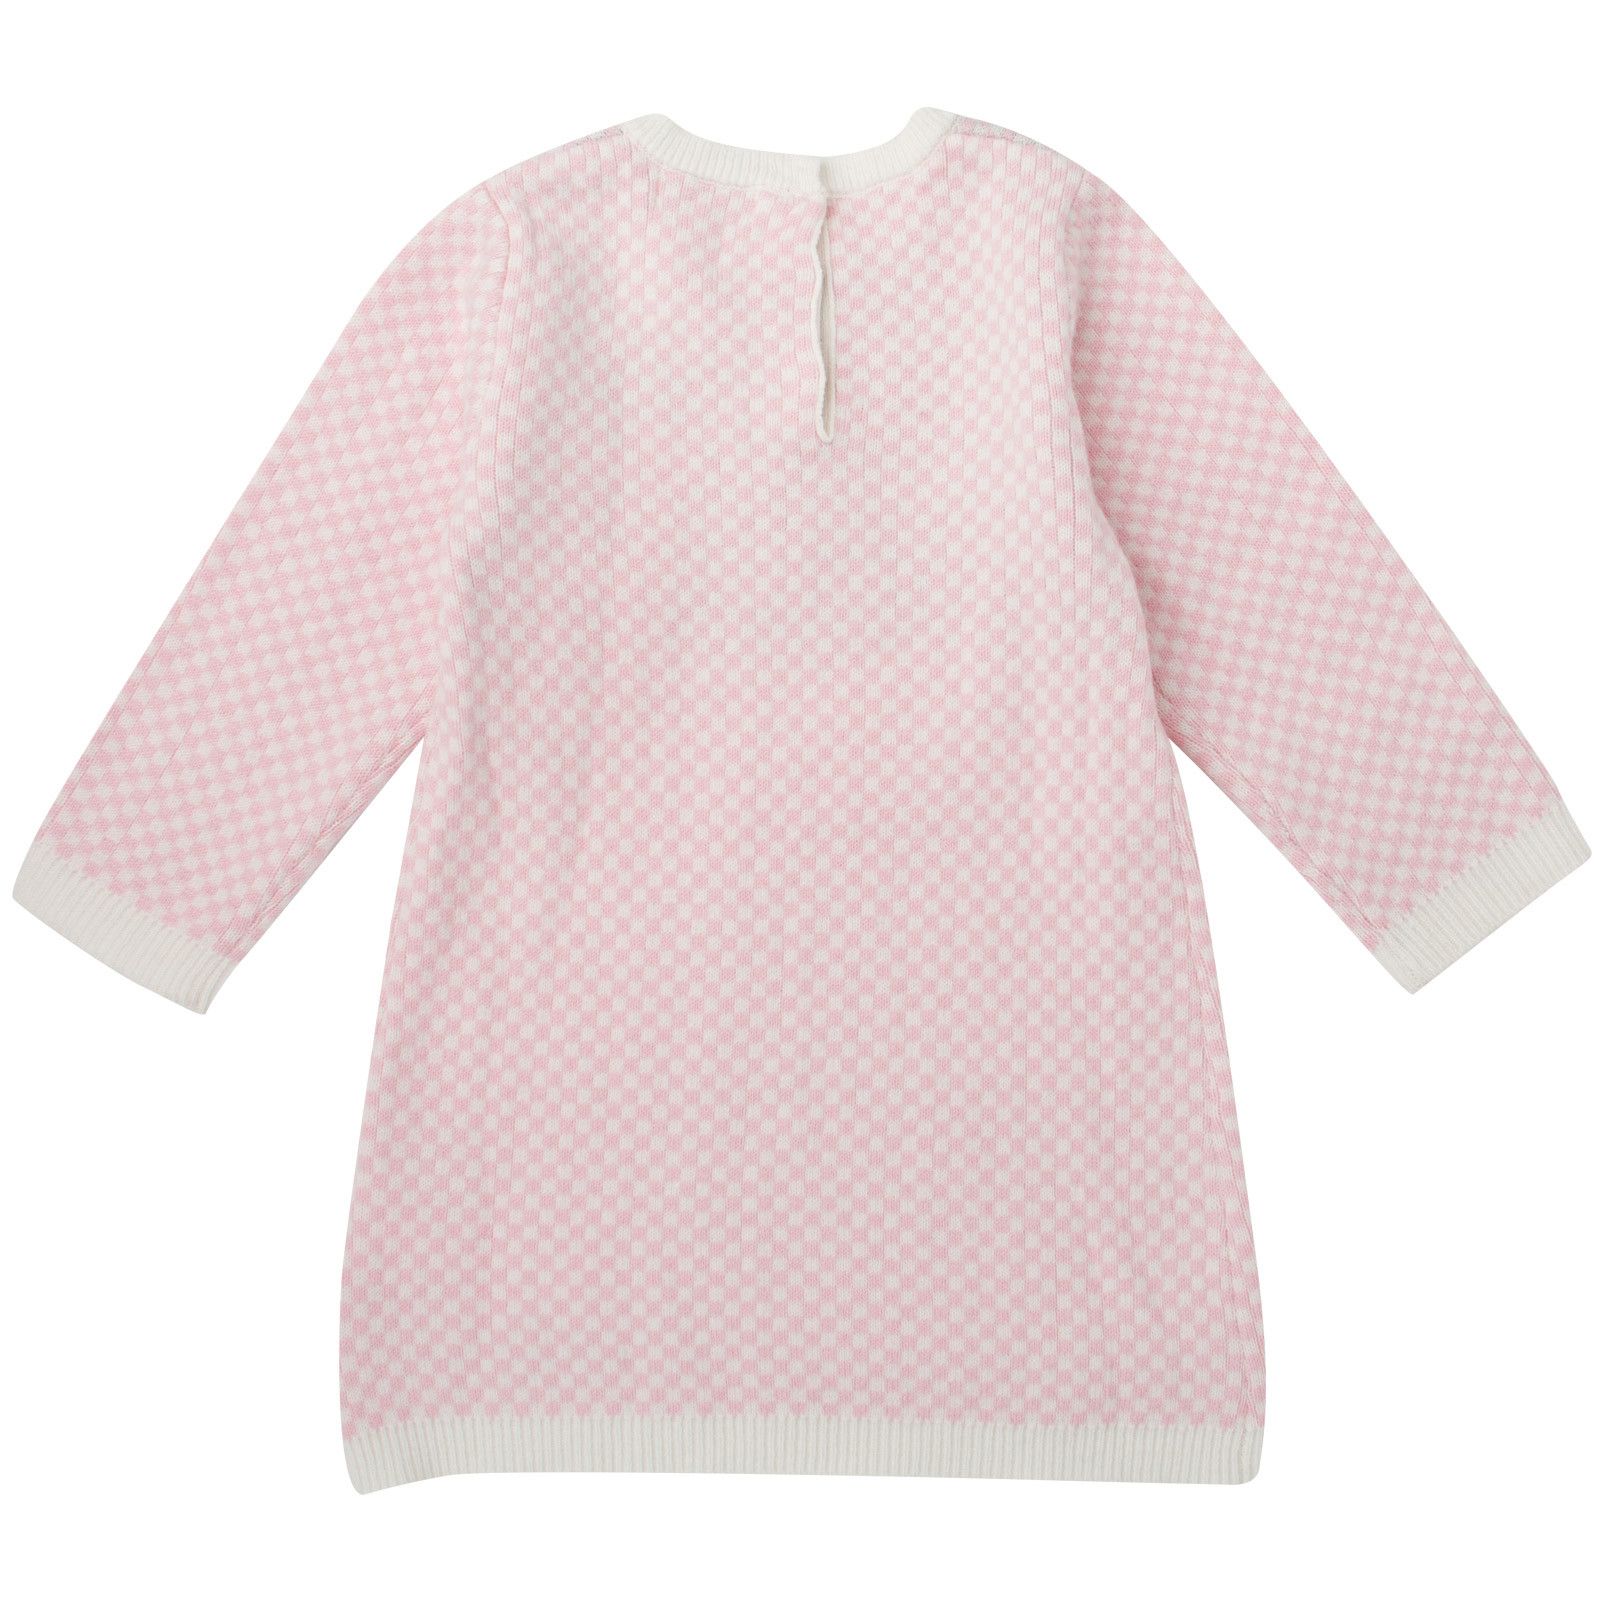 Baby Girls Pink&White Tiger Embroidered Kintted Sweater Dress - CÉMAROSE | Children's Fashion Store - 2